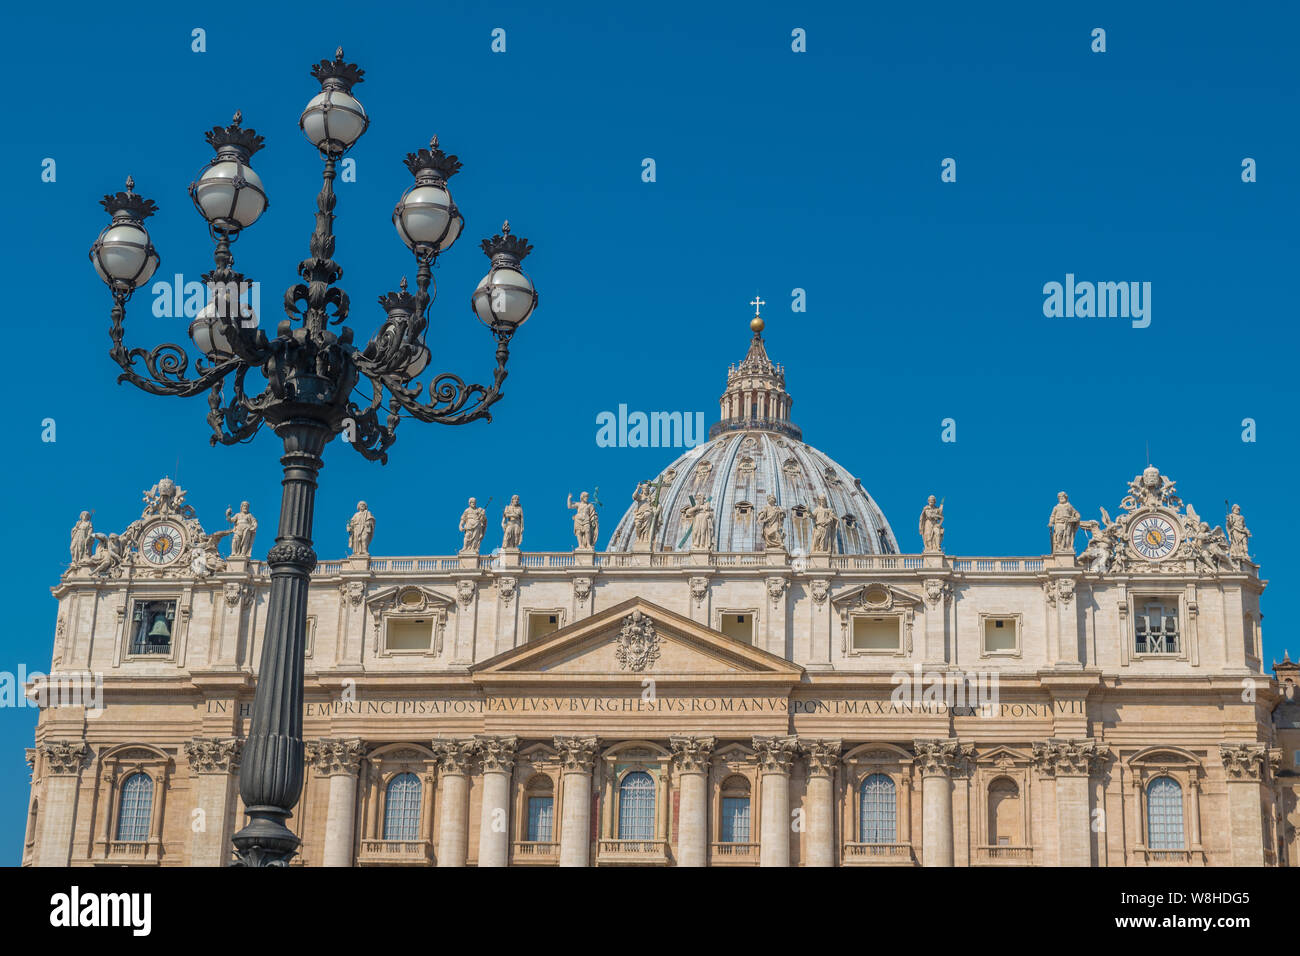 Lampposts of St. Peter's Square and Basilica in the background Stock Photo